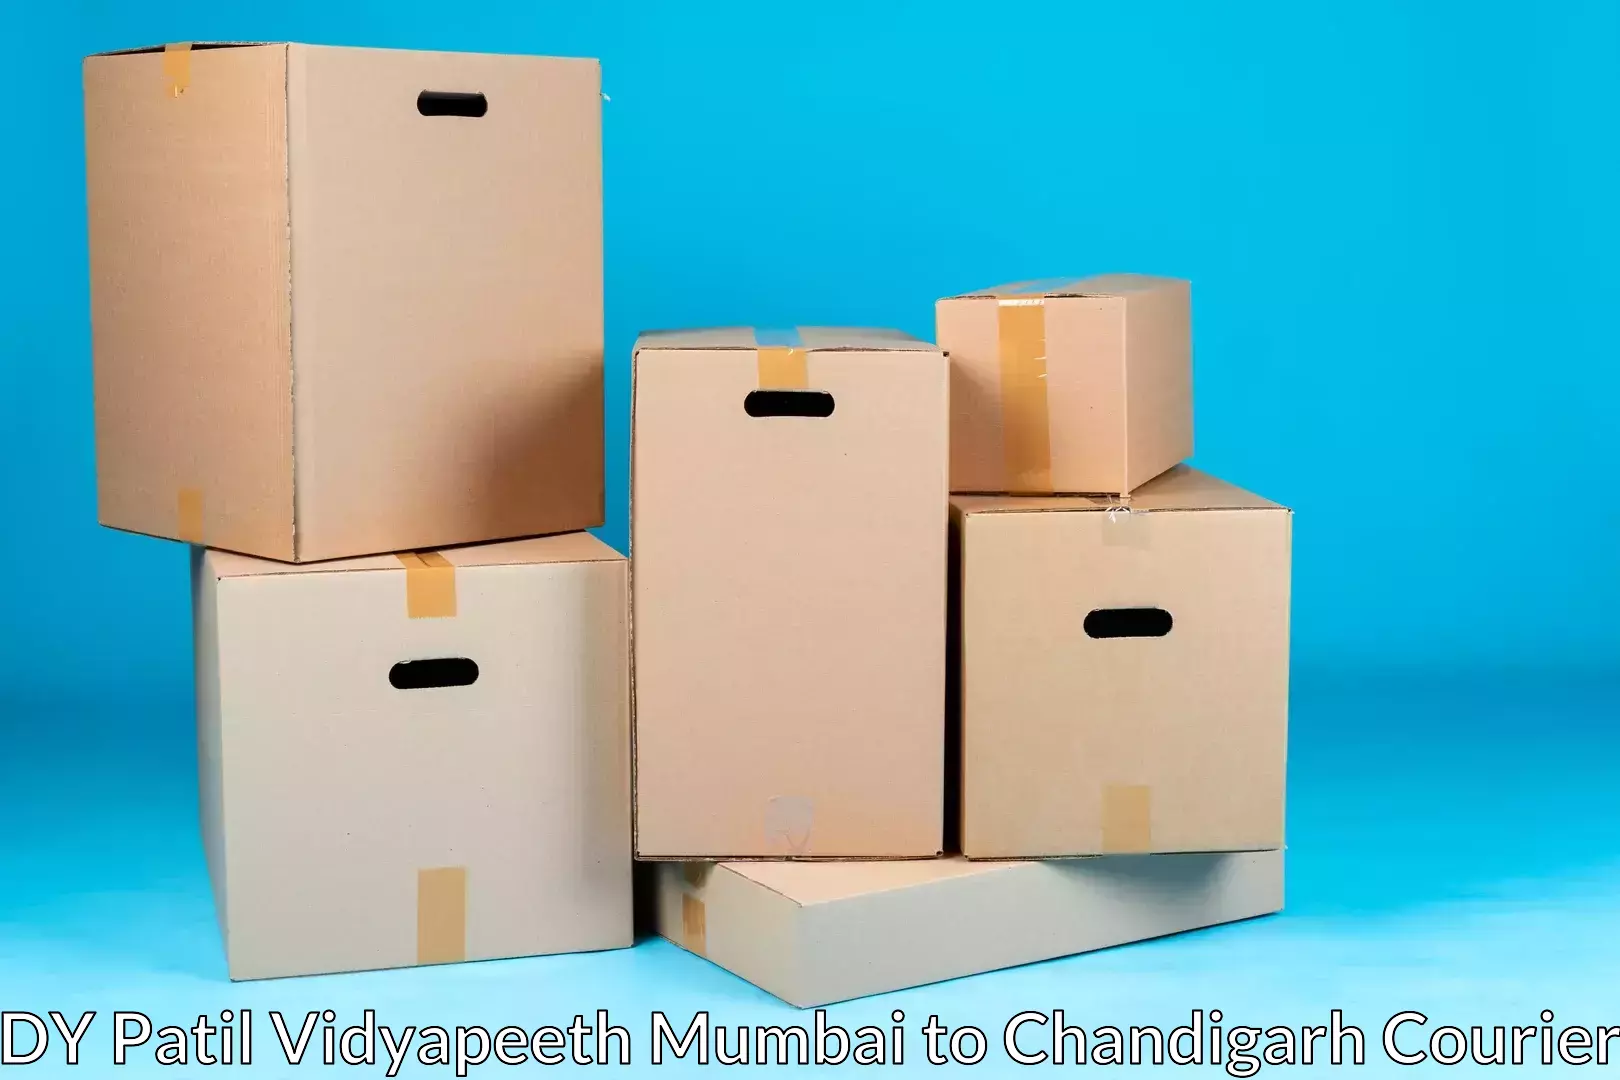 Home goods moving company in DY Patil Vidyapeeth Mumbai to Chandigarh